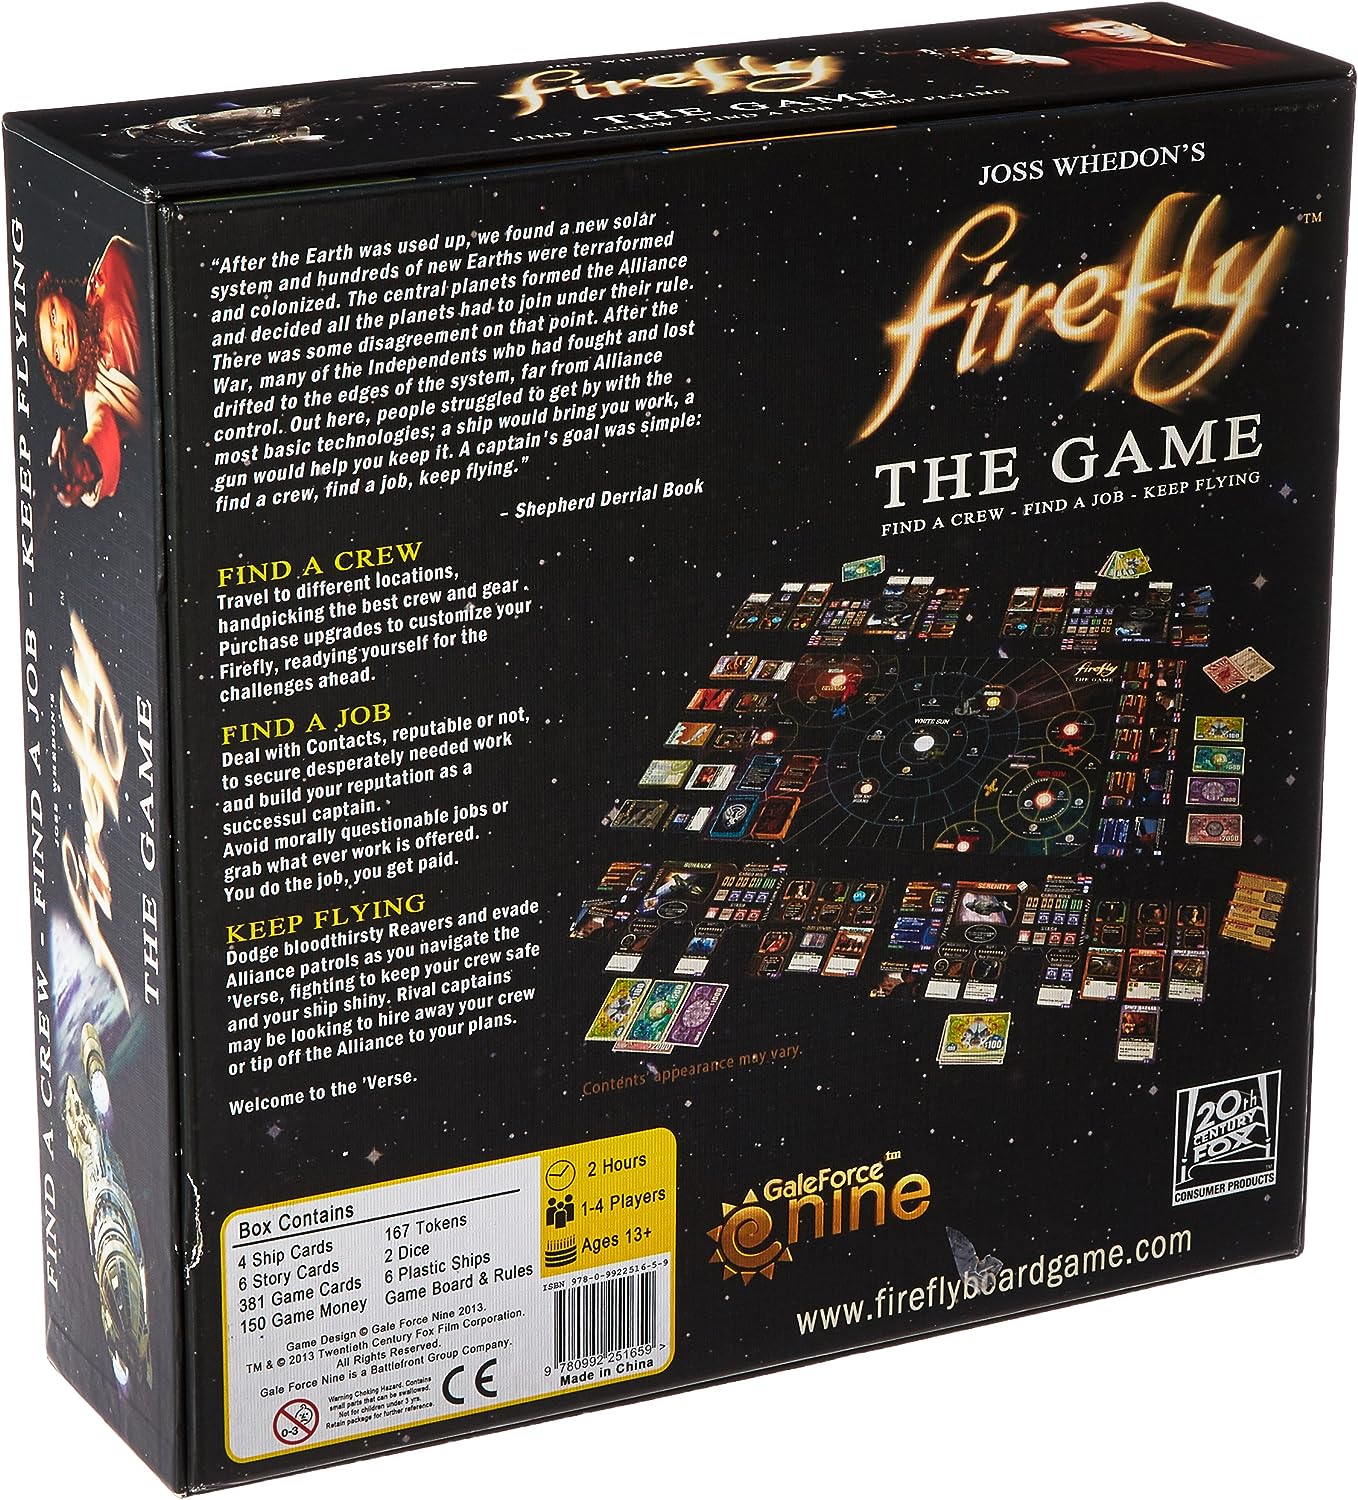 Rental - Firefly: The Game